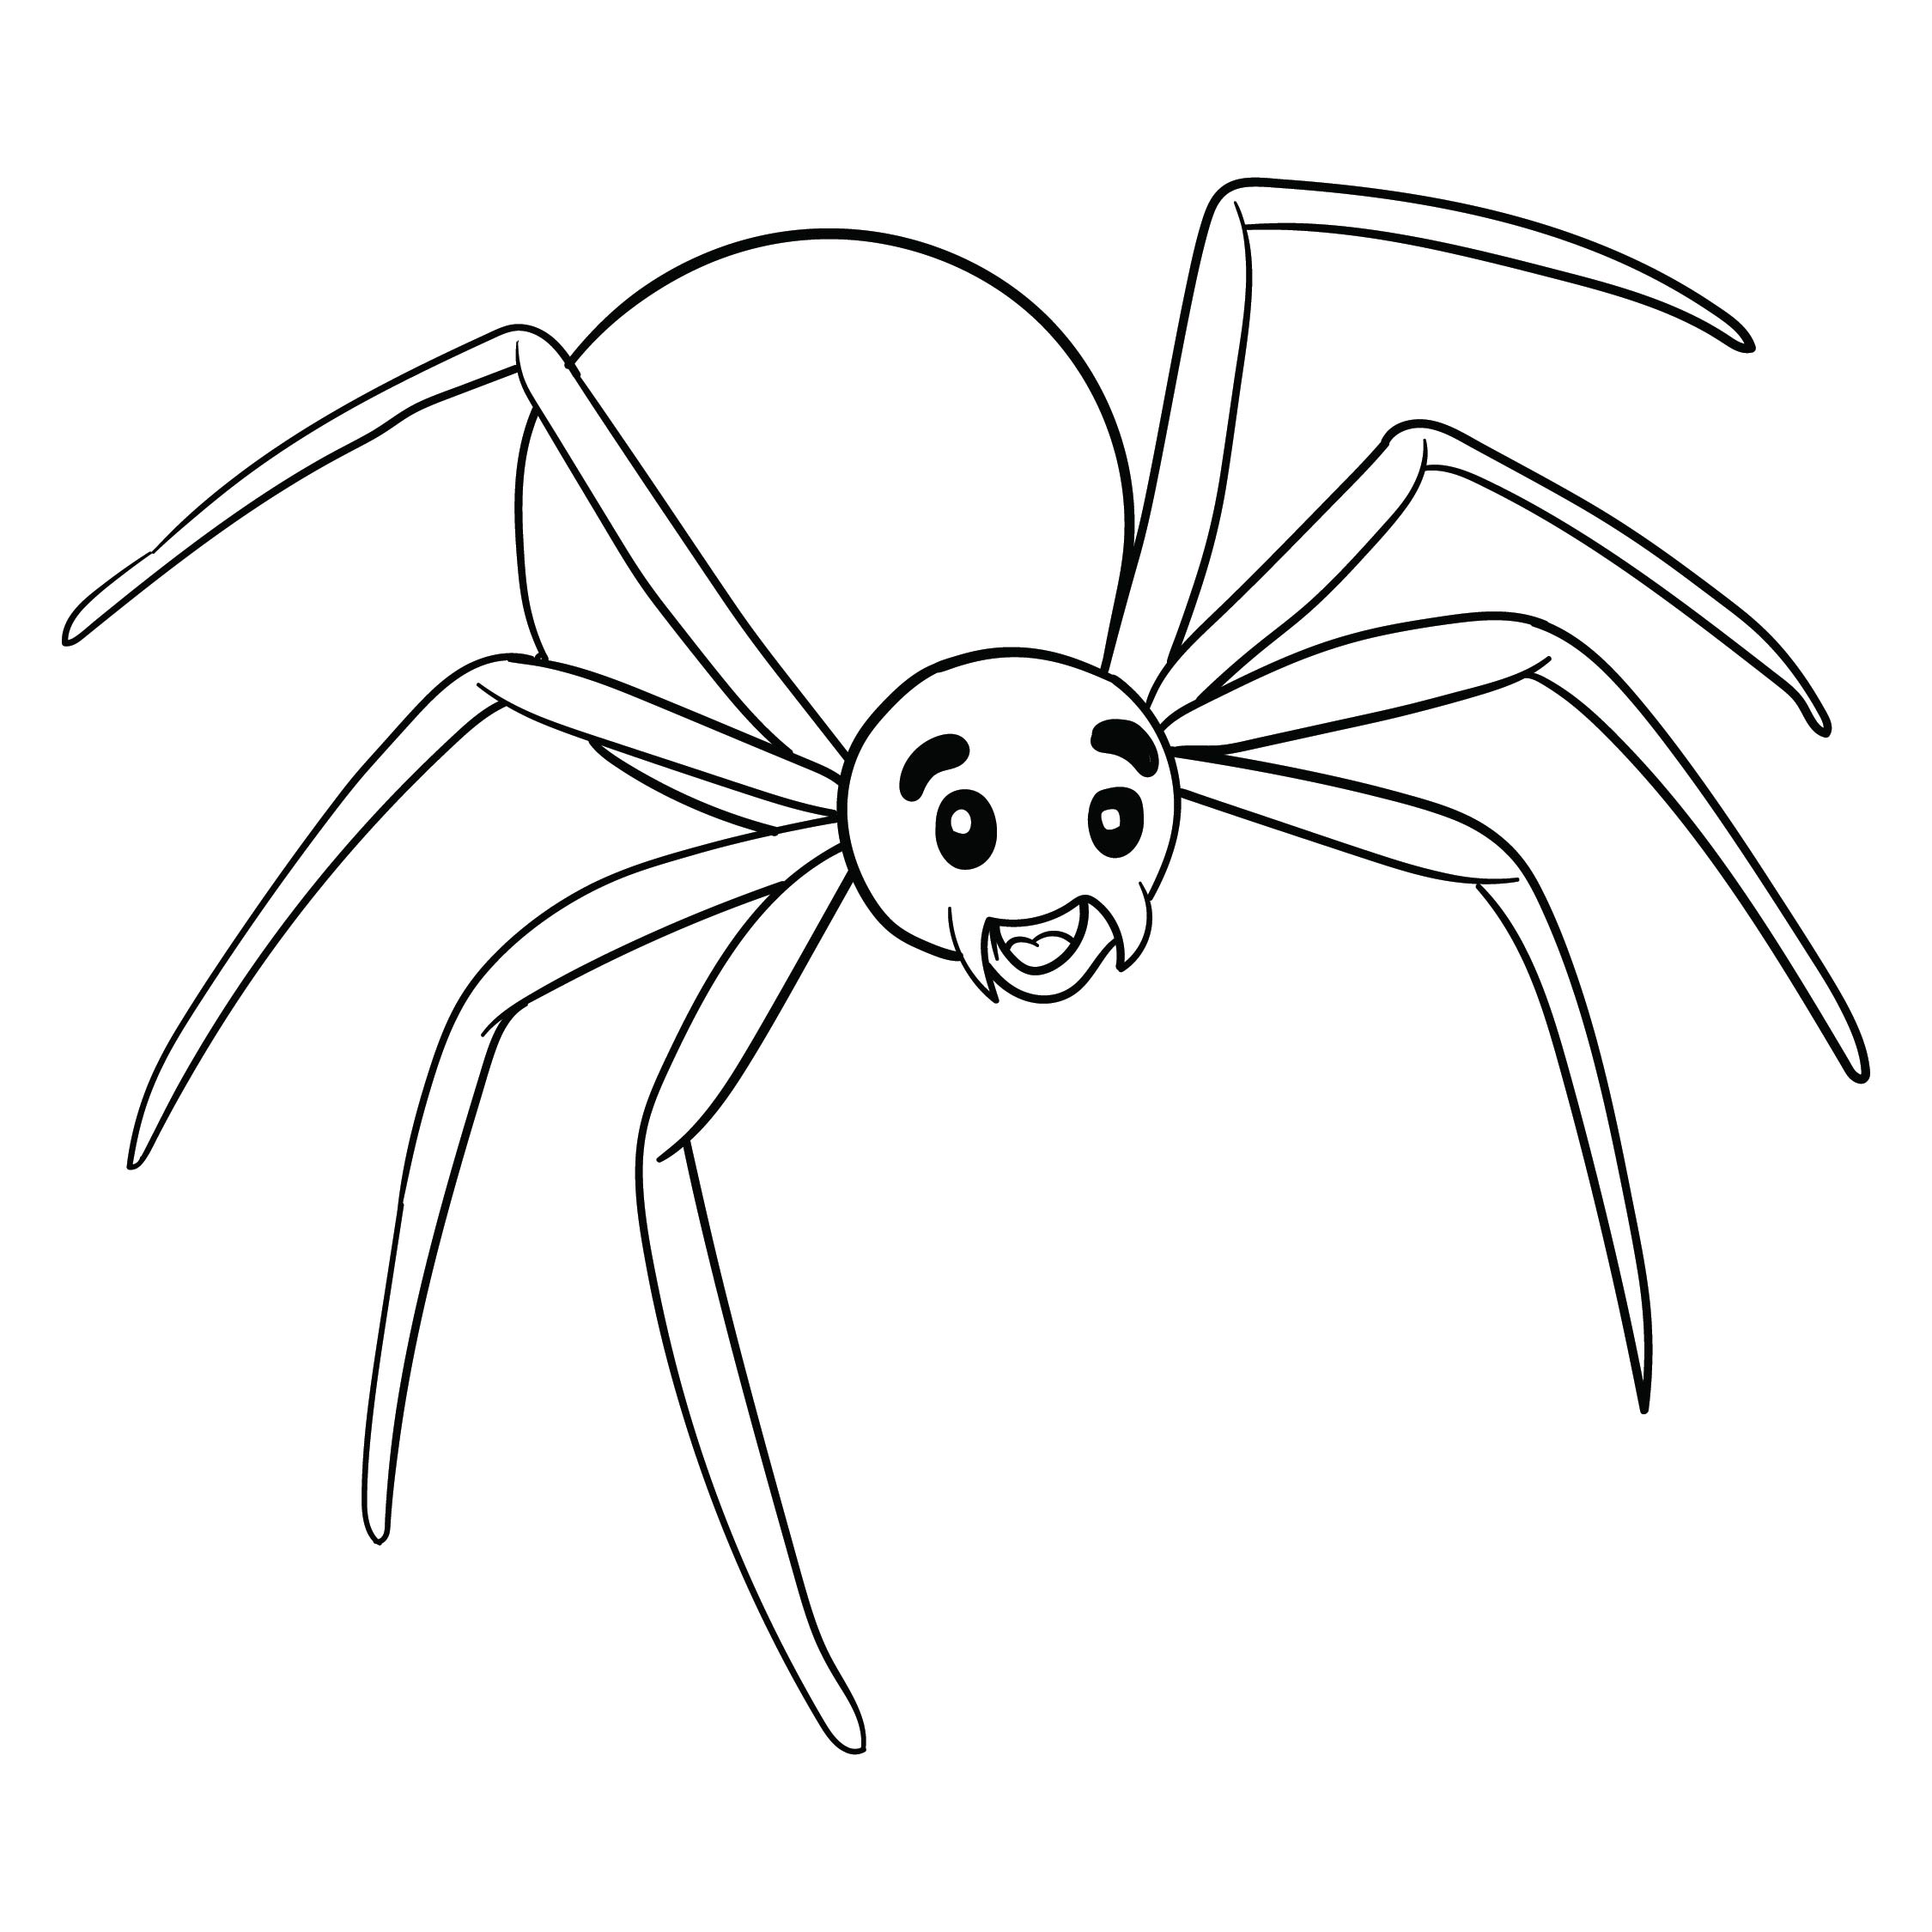 Spider Halloween Coloring Page Free Coloring Page Template Printing ...